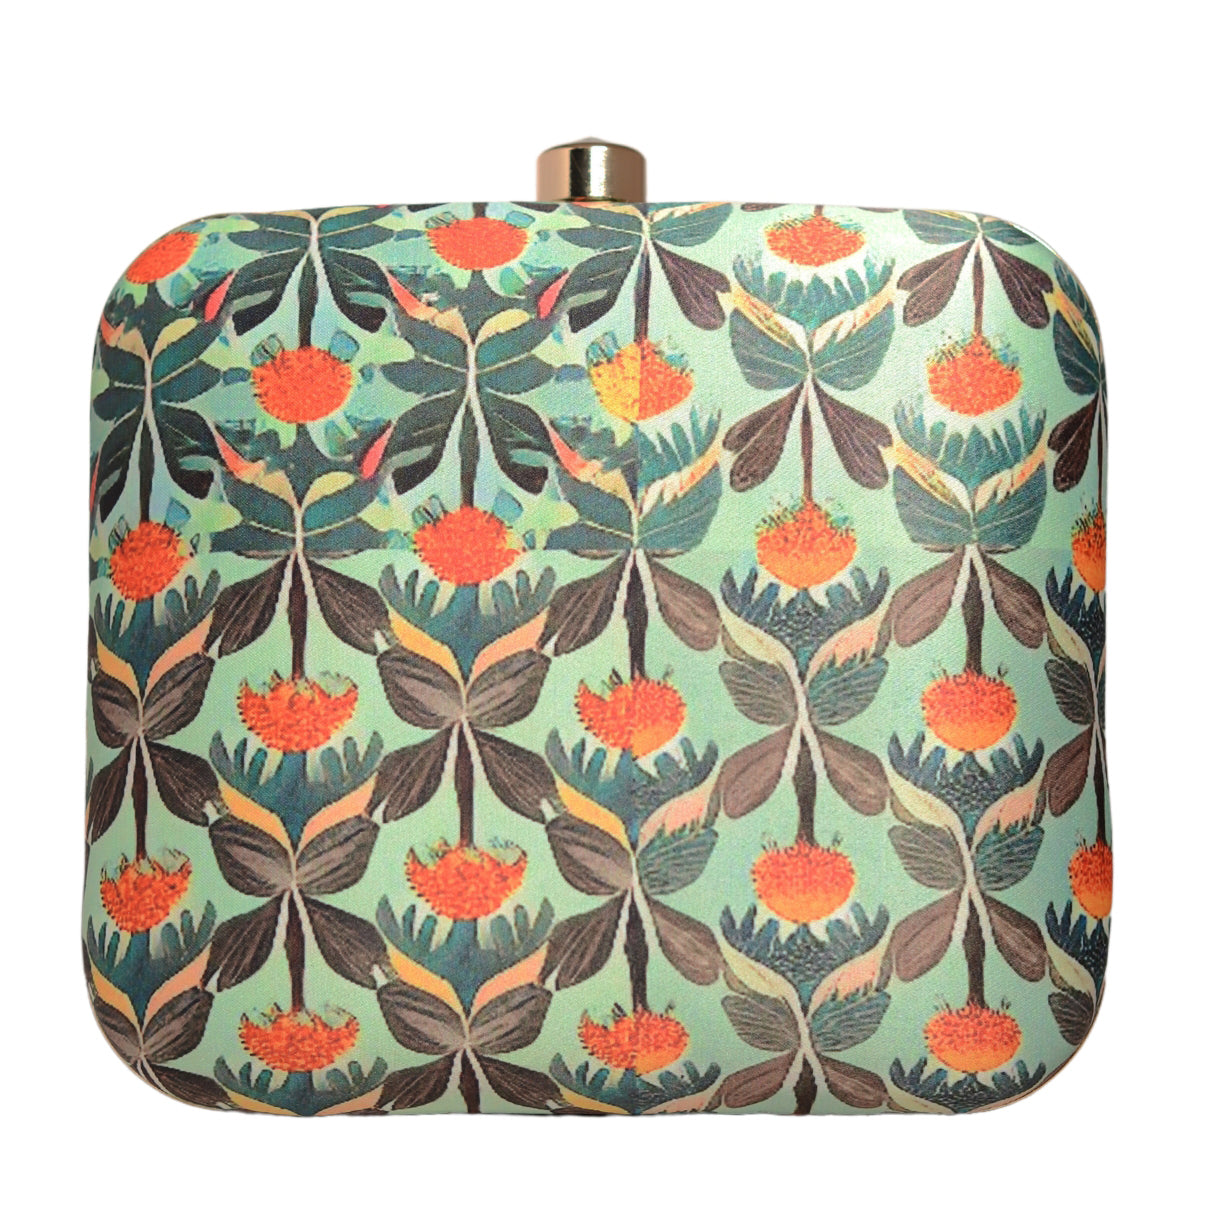 Blue And Orange Floral Printed Clutch